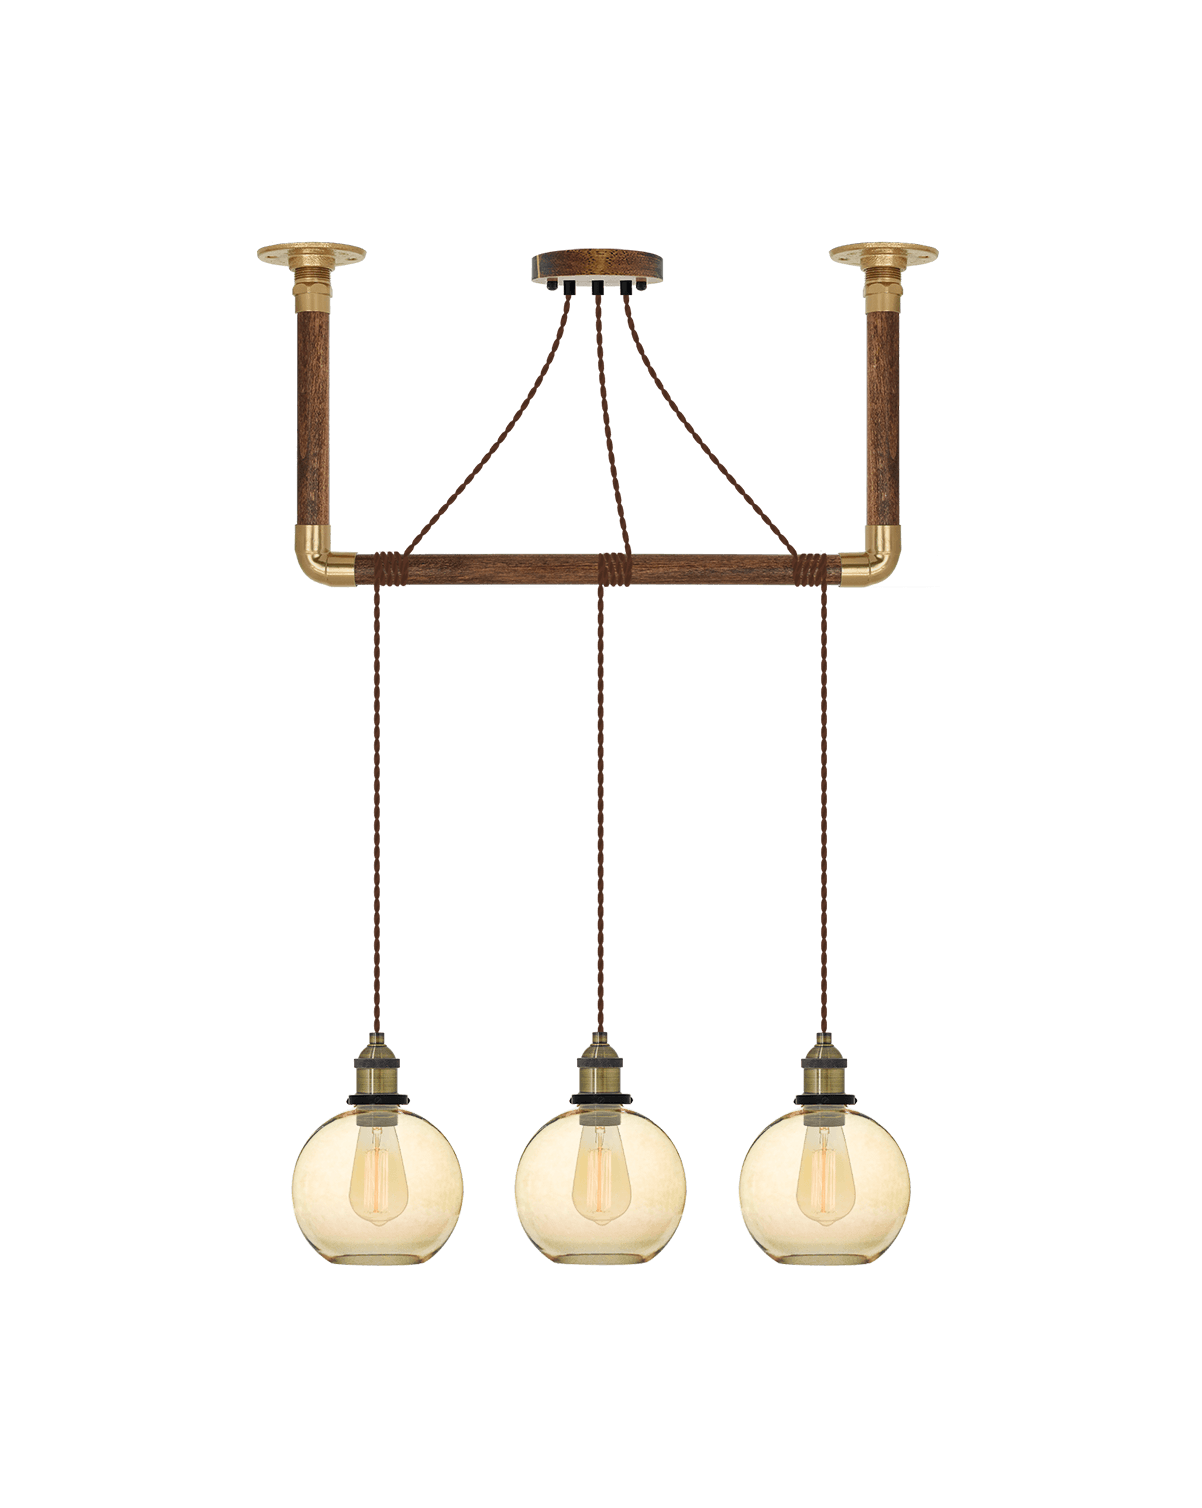 Wrap Chandelier: Brown, Brass and Amber Glass Shade Hangout Lighting 3 Pendants